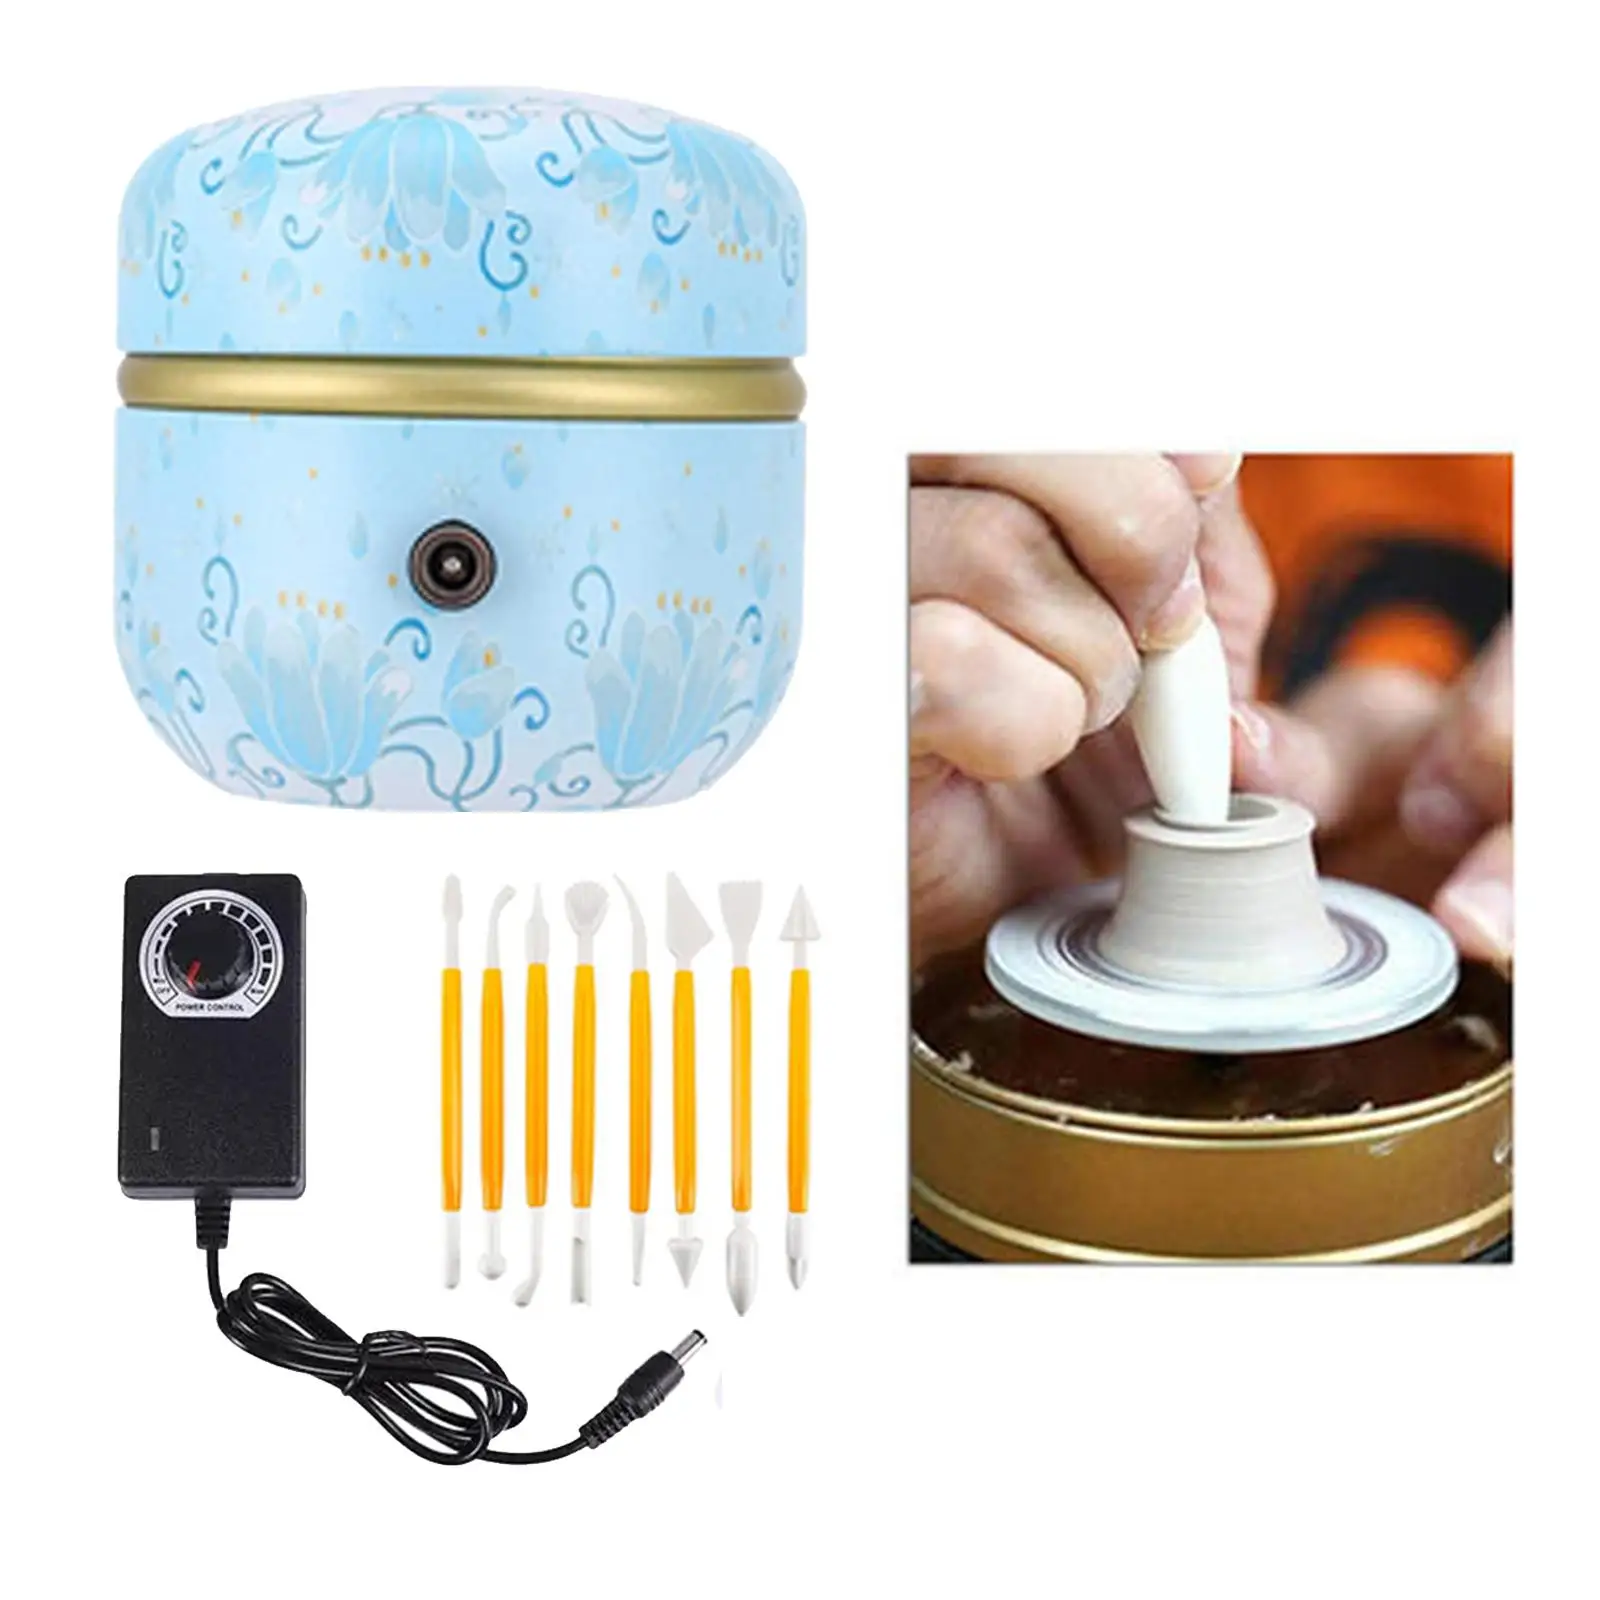 MINI Pottery Wheel Machine with Sculpting Kit Ceramics Clay Pottery Tools Rotary Plate Electric Pottery Turntable